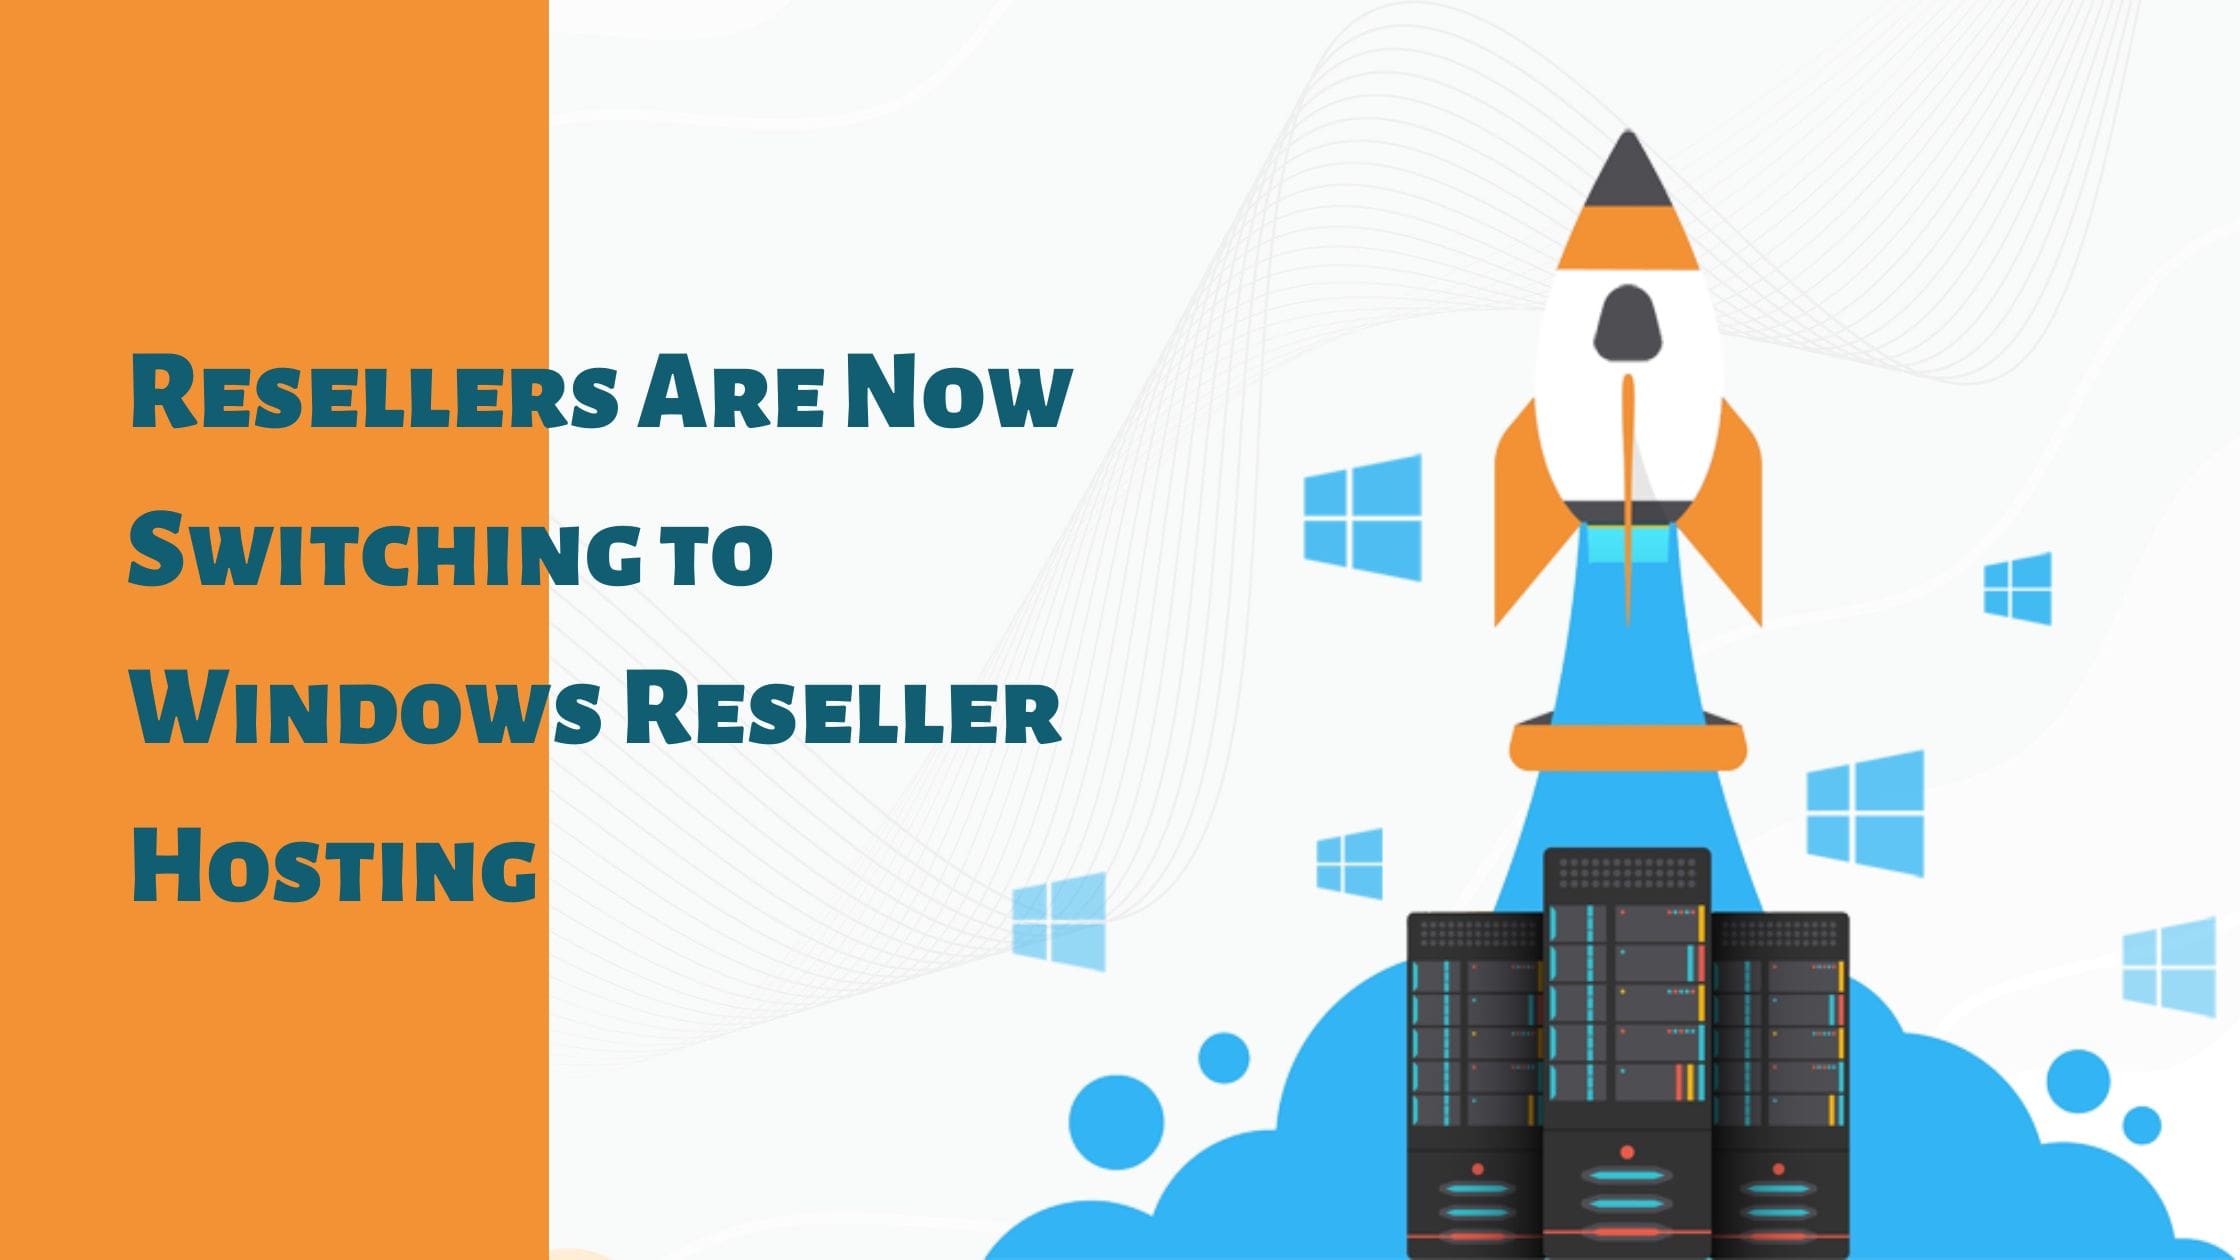 Resellers are now switching to Windows Reseller Hosting